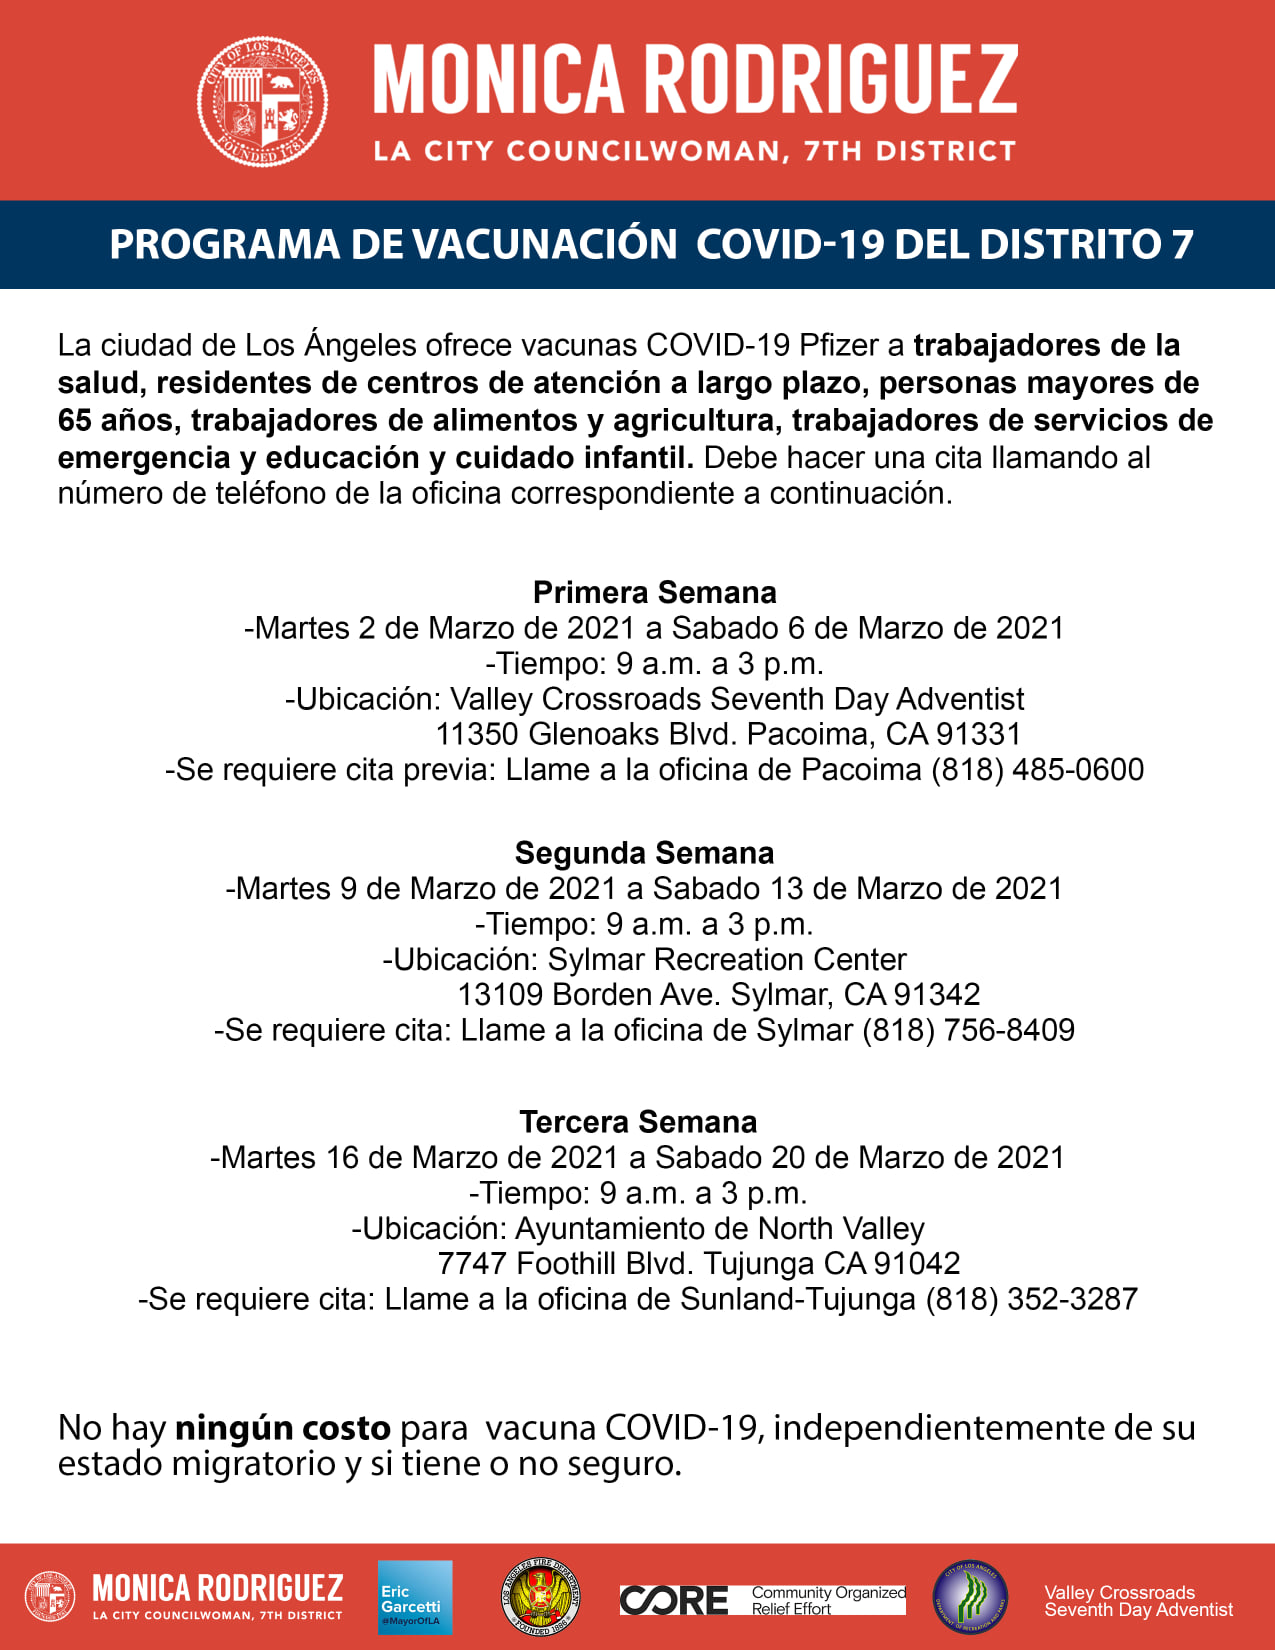 Workers Eligible for the COVID-19 Vaccine 